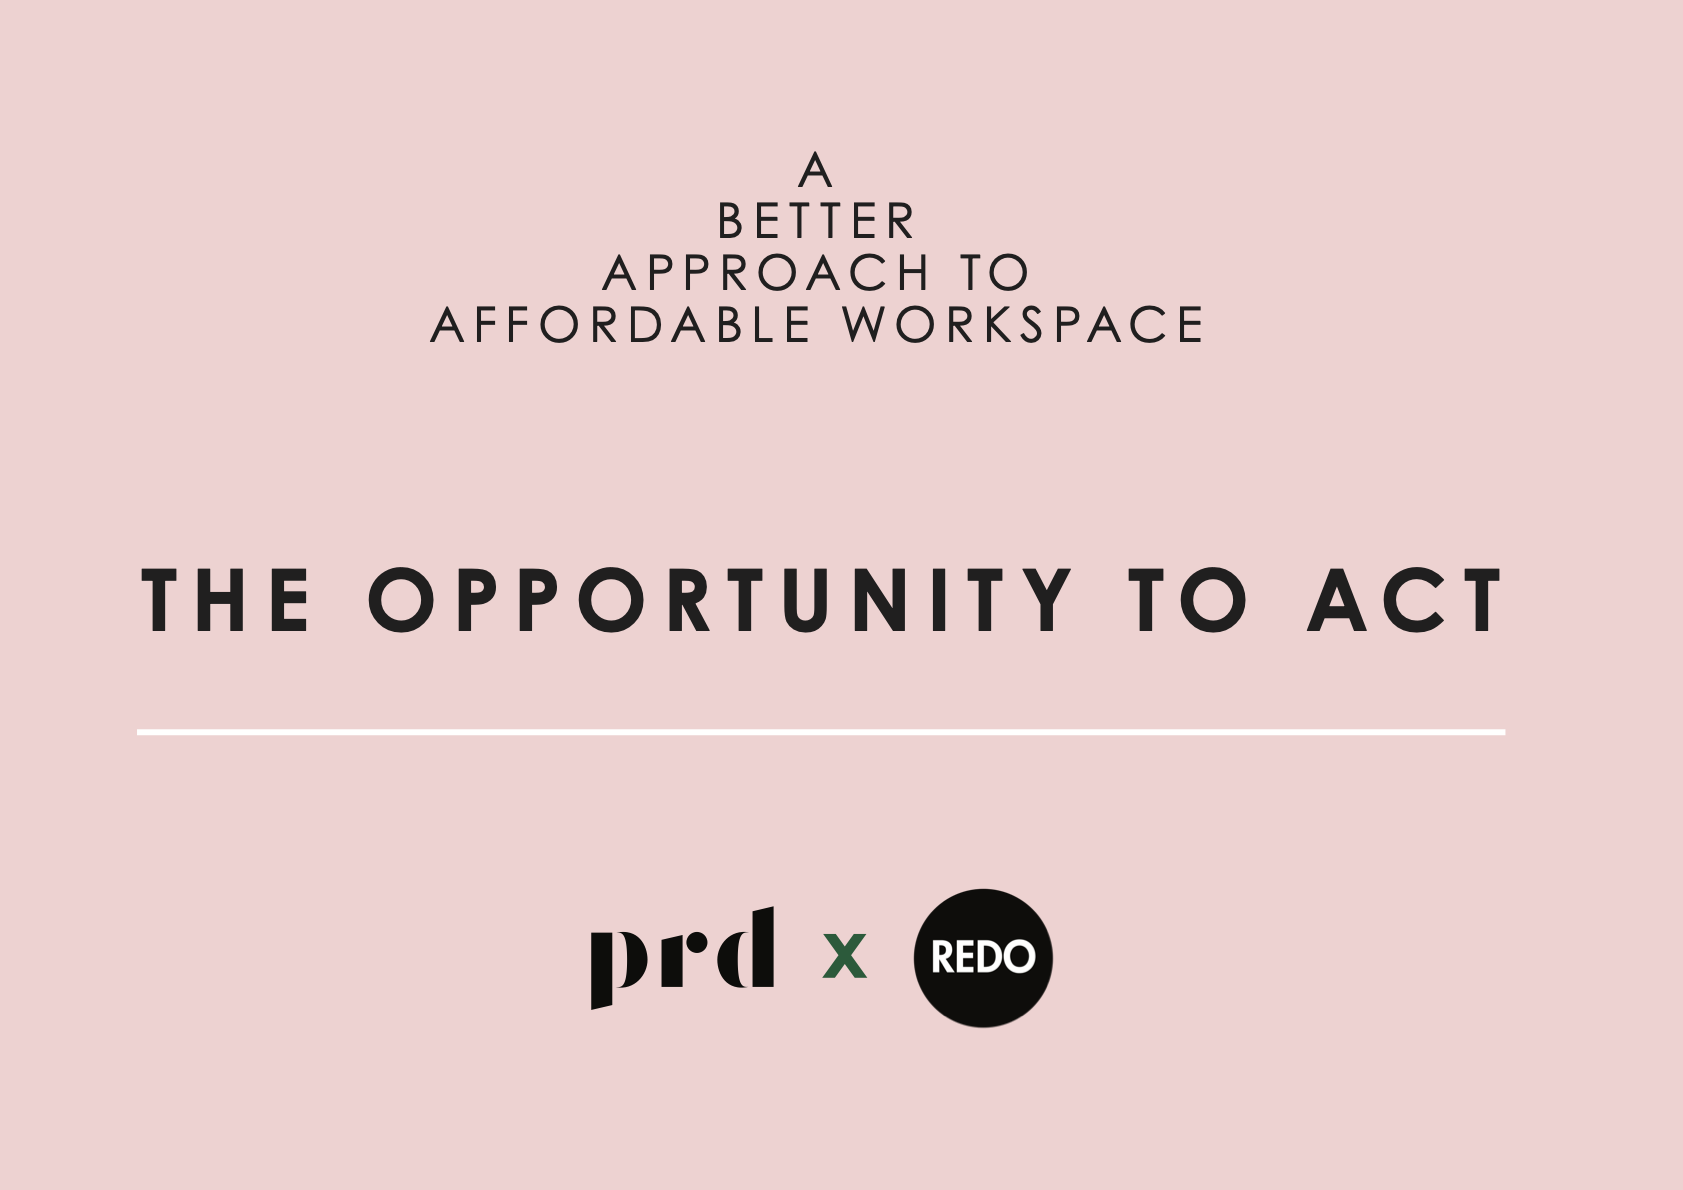 PRD x REDO_A Better Approach to Affordable Workspace_The Opportunity to Act-1 (dragged).png